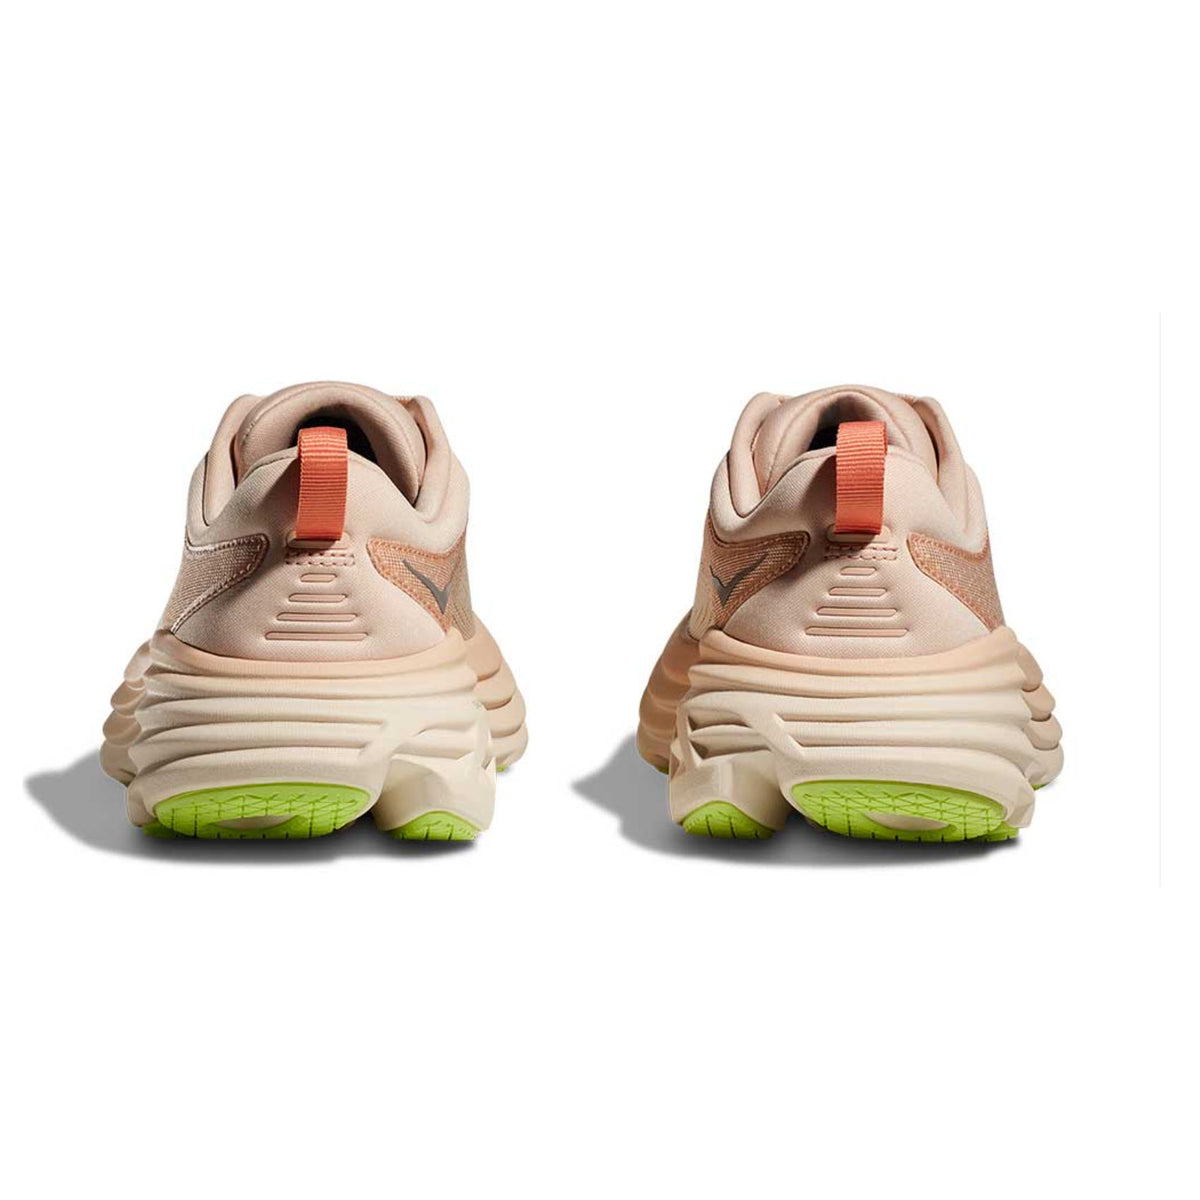 Pair of beige Hoka Bondi 8 sneakers with vibrant green soles and orange pull tabs, featuring ultra-cushioned shoes awarded the APMA Seal of Acceptance.